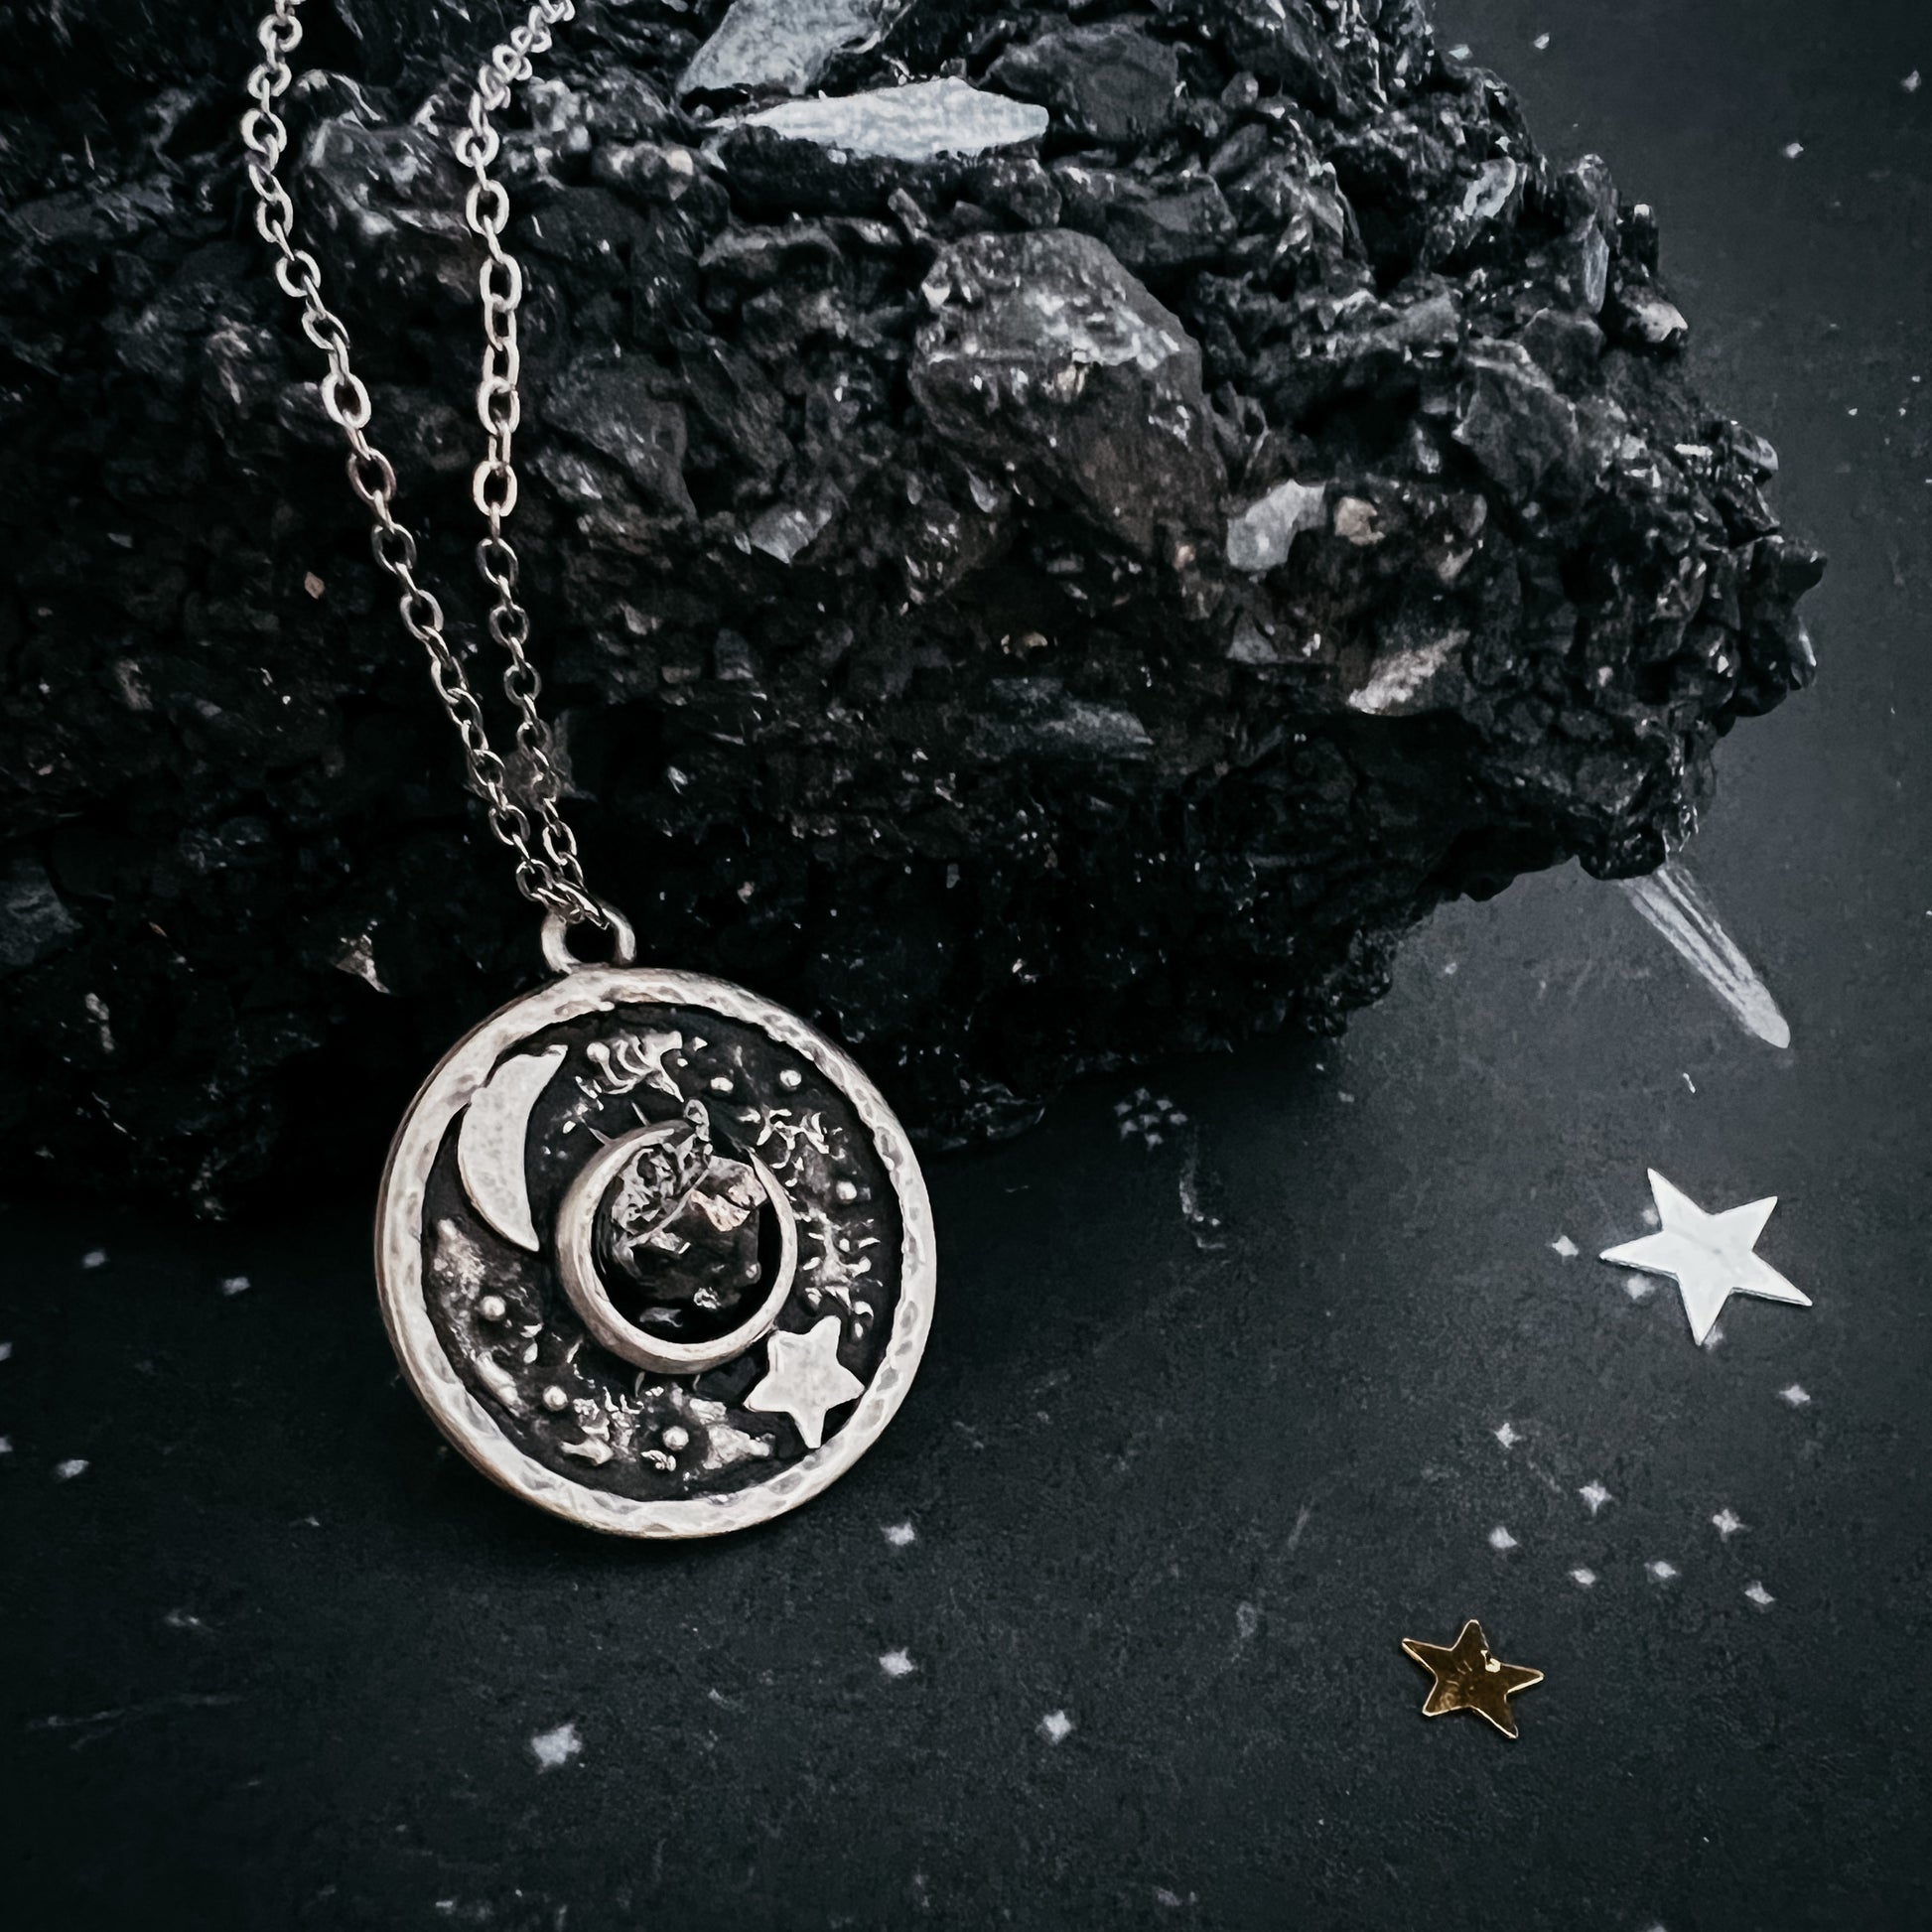 Night Sky Pendant Necklace with Authentic Meteorite Necklace Yugen Handmade   